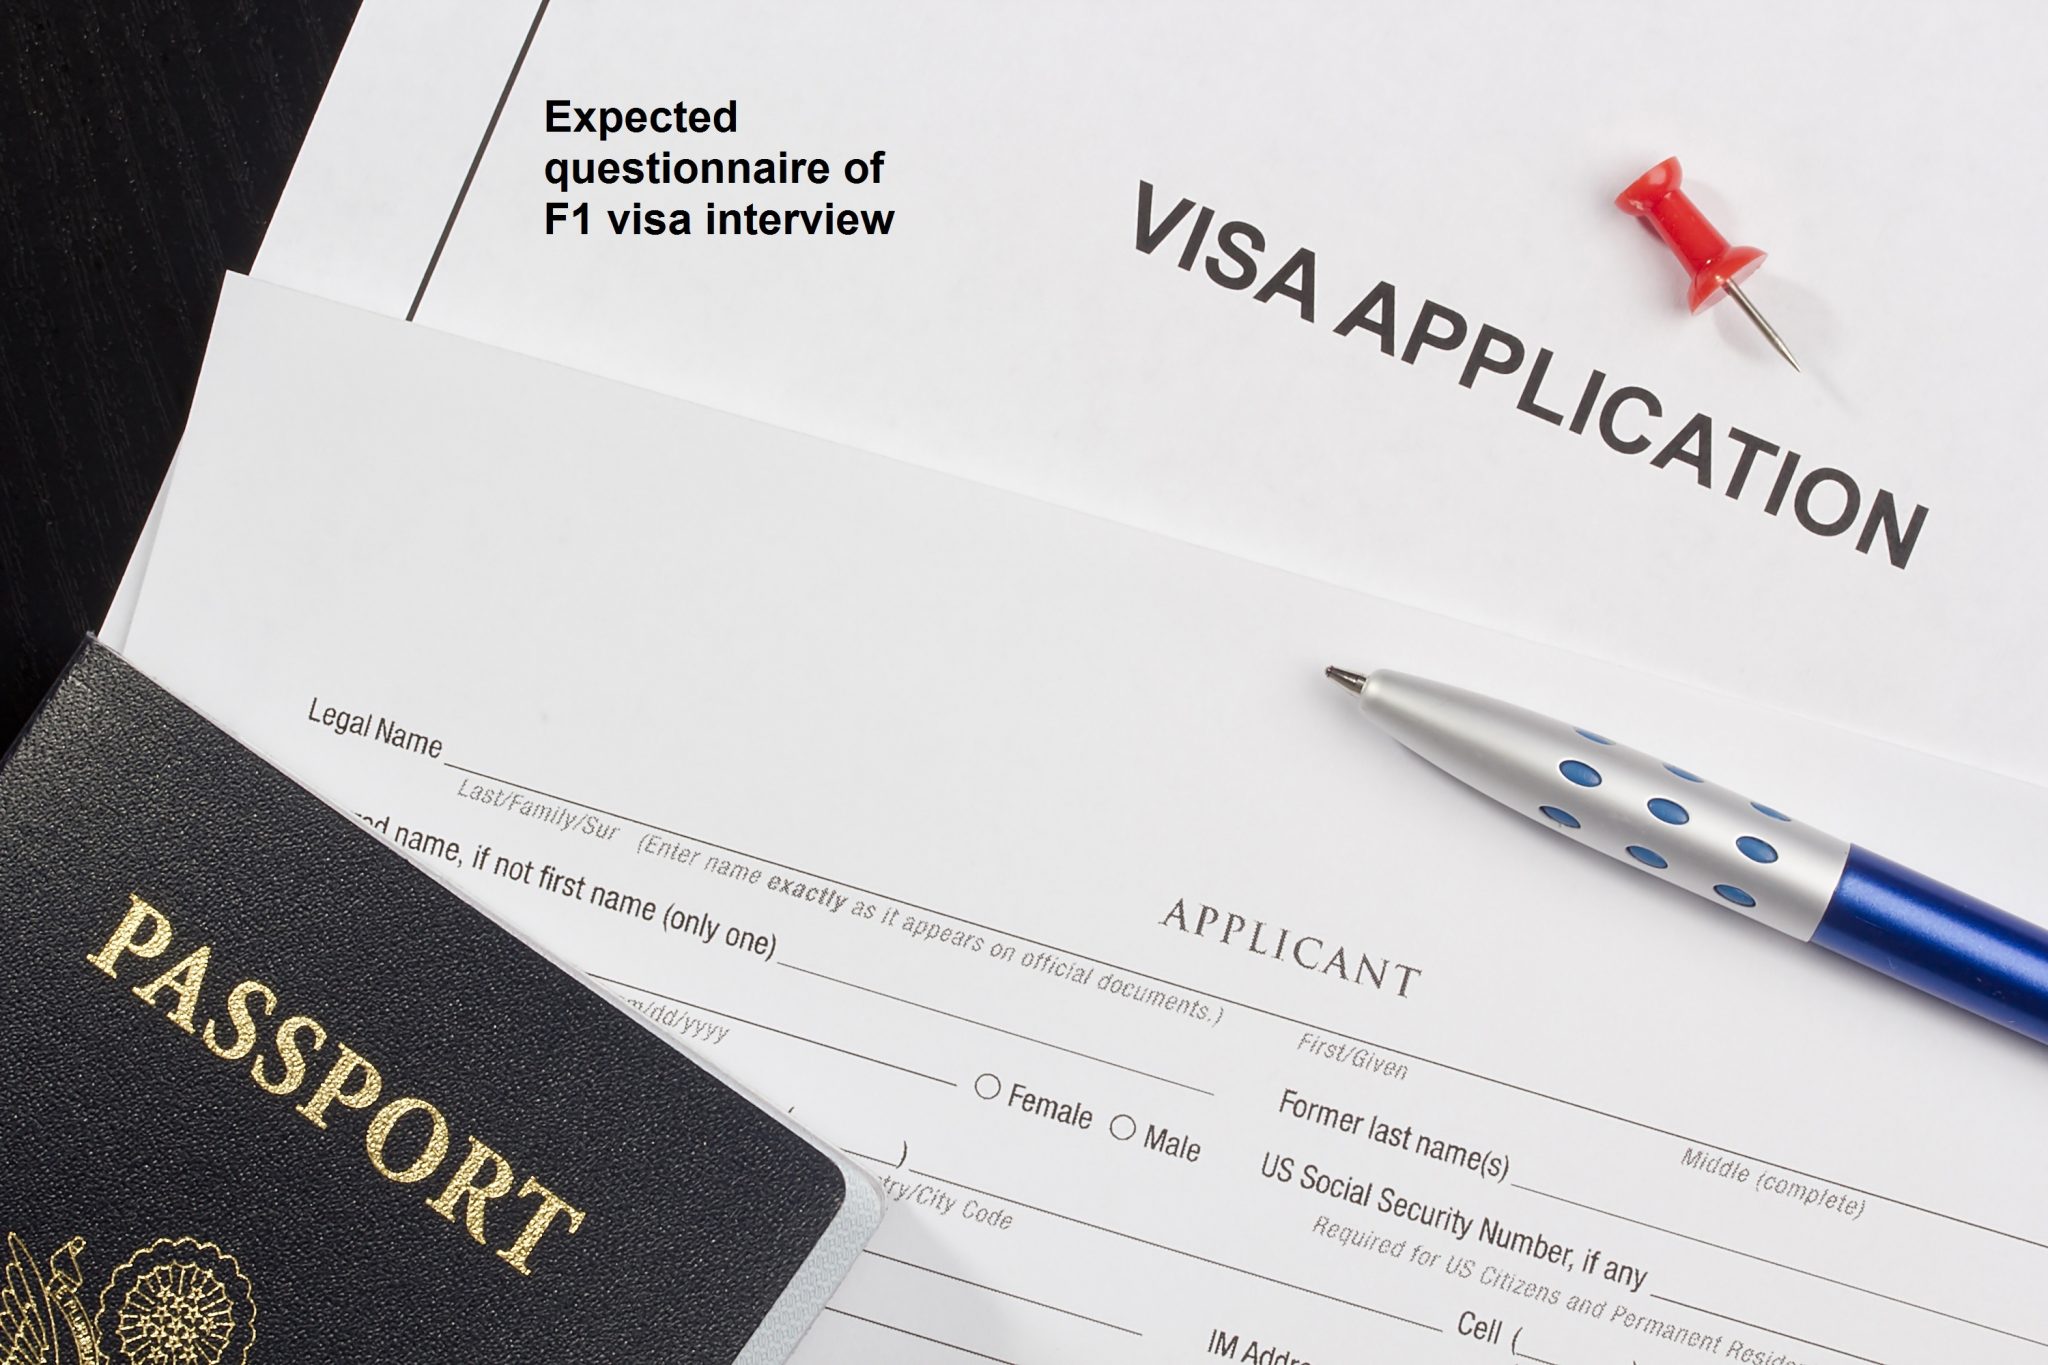 Expected questionnaire of F1 visa interview